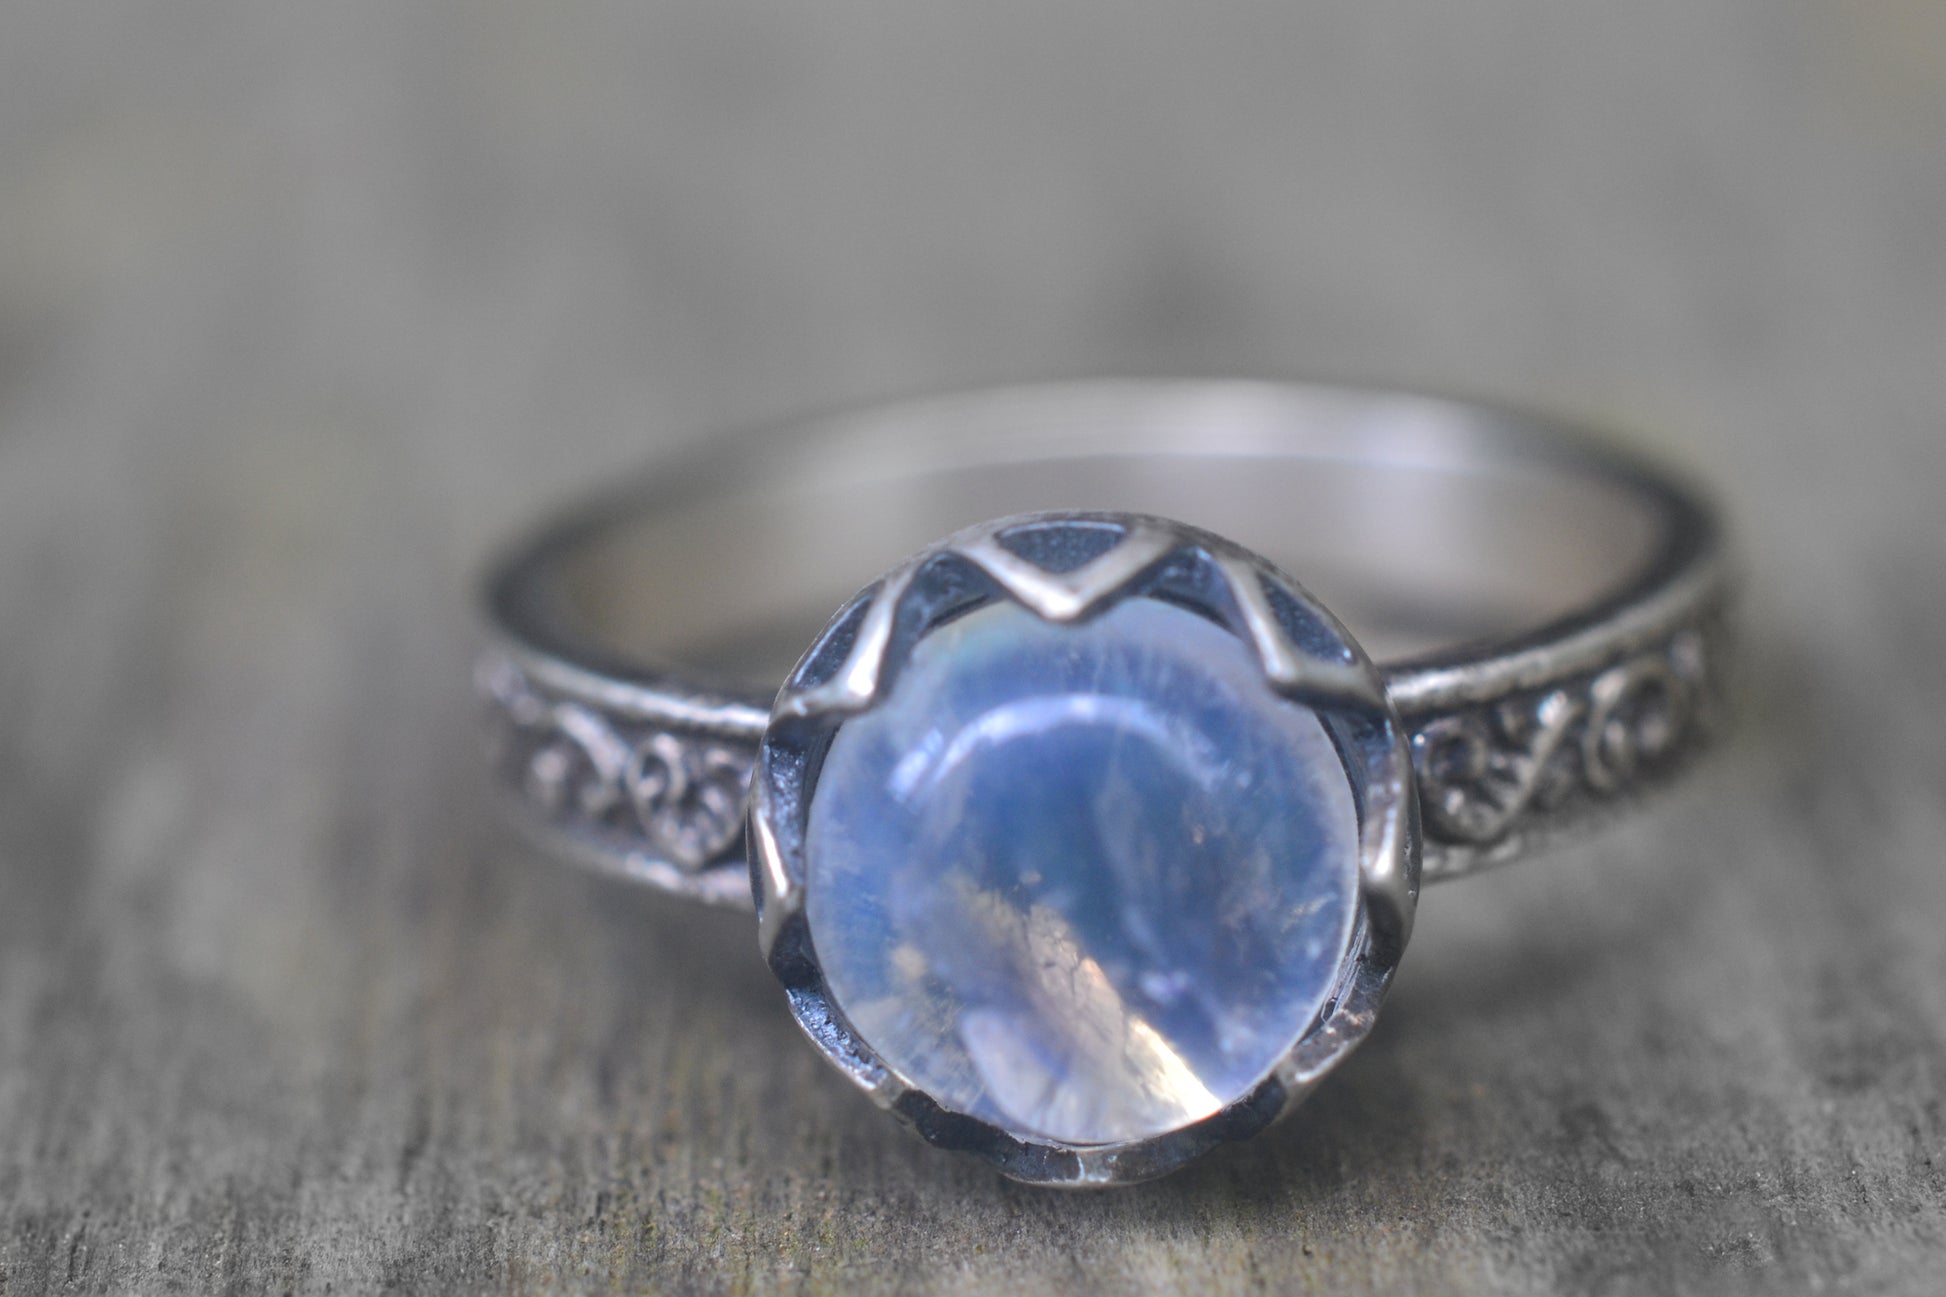 8mm Round Rainbow Moonstone Ring in Silver